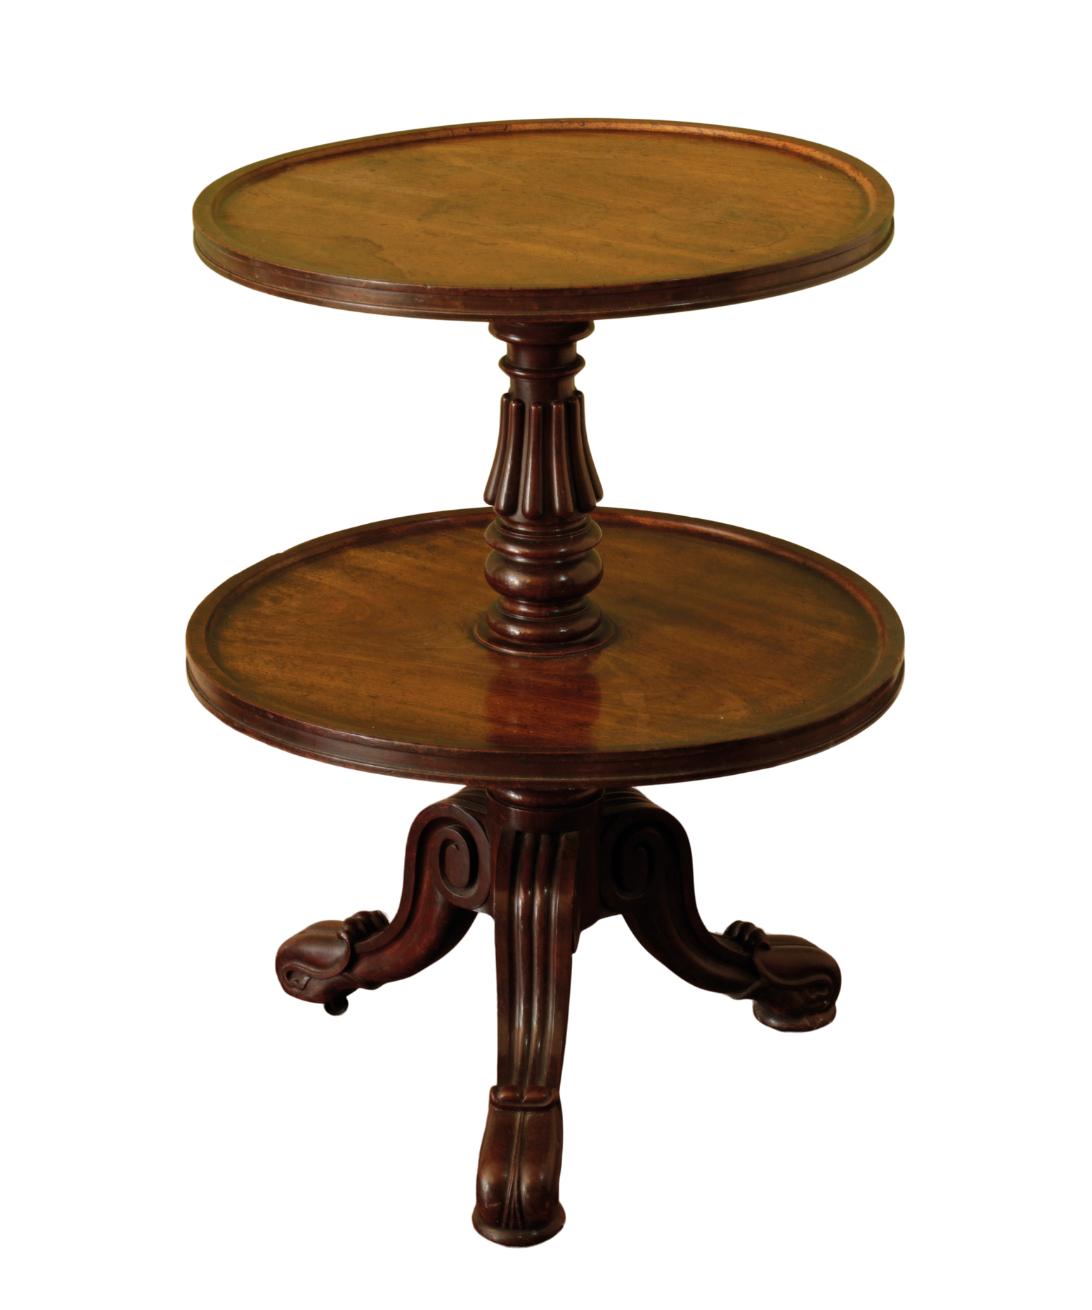 A REGENCY OR GEORGE IV MAHOGANY DUMB WAITER, ATTRIBUTABLE TO GILLOWS, - Image 2 of 2